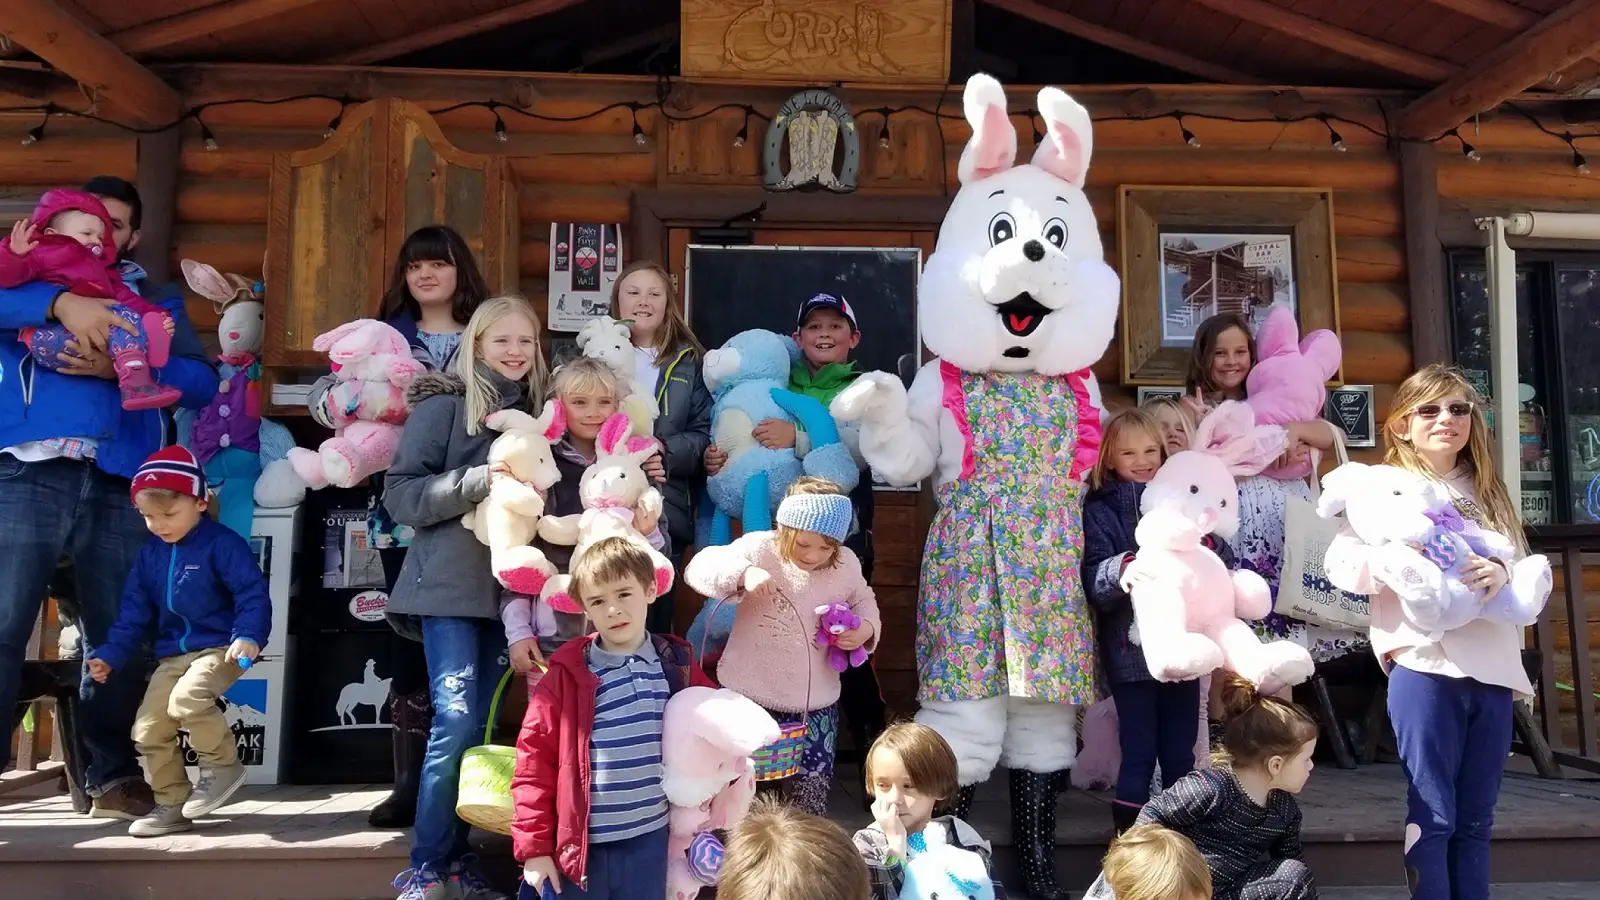 Children and a person in an Easter bunny costume gather outside the entrance to the Corral Bar and Steakhouse in Big Sky, Montana.